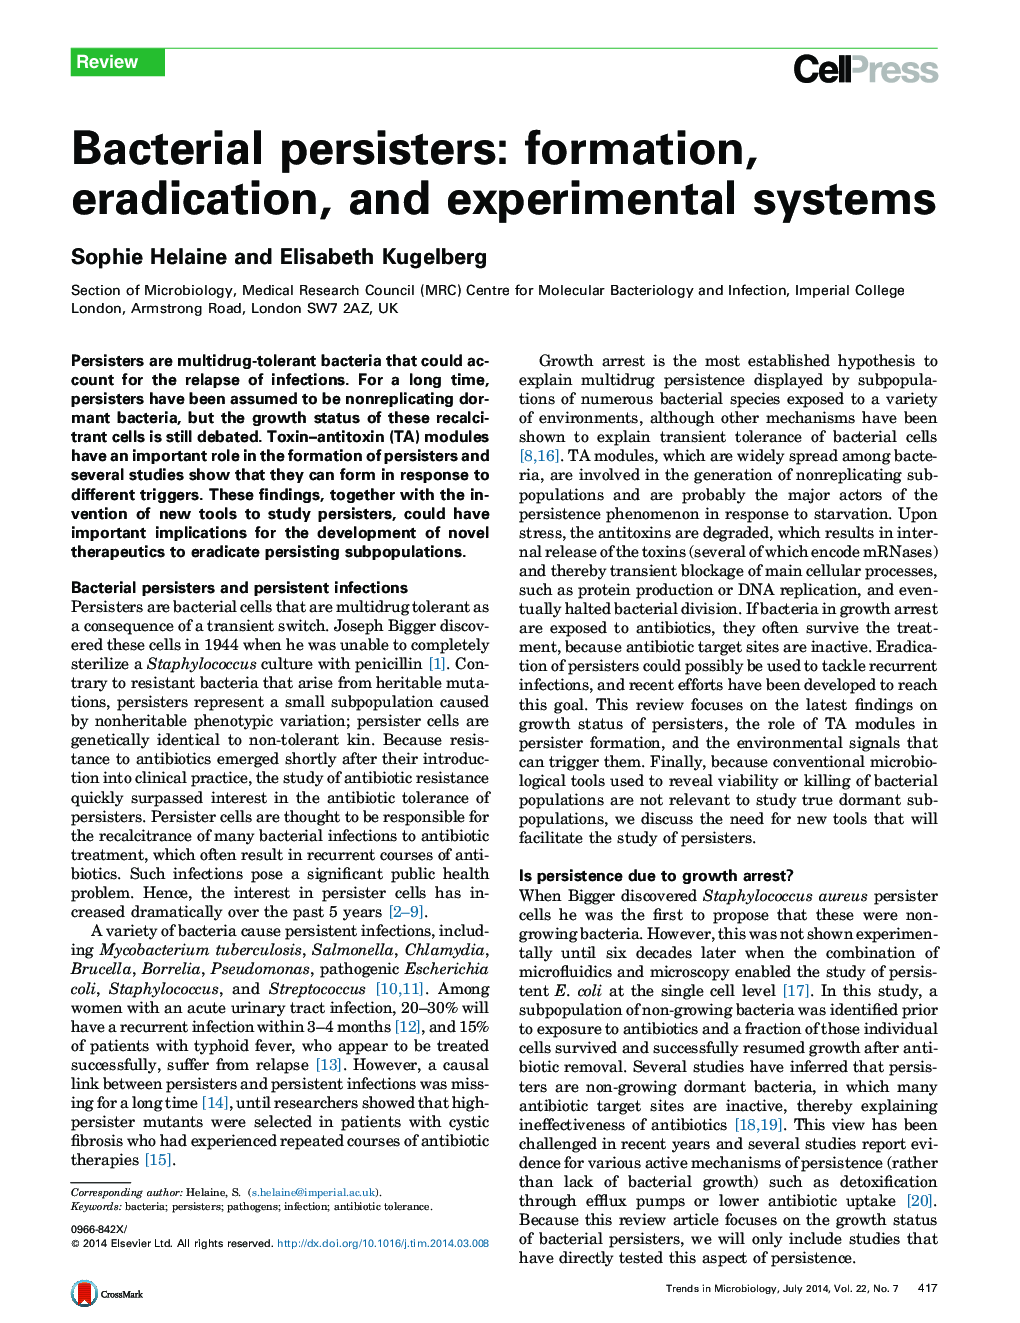 Bacterial persisters: formation, eradication, and experimental systems